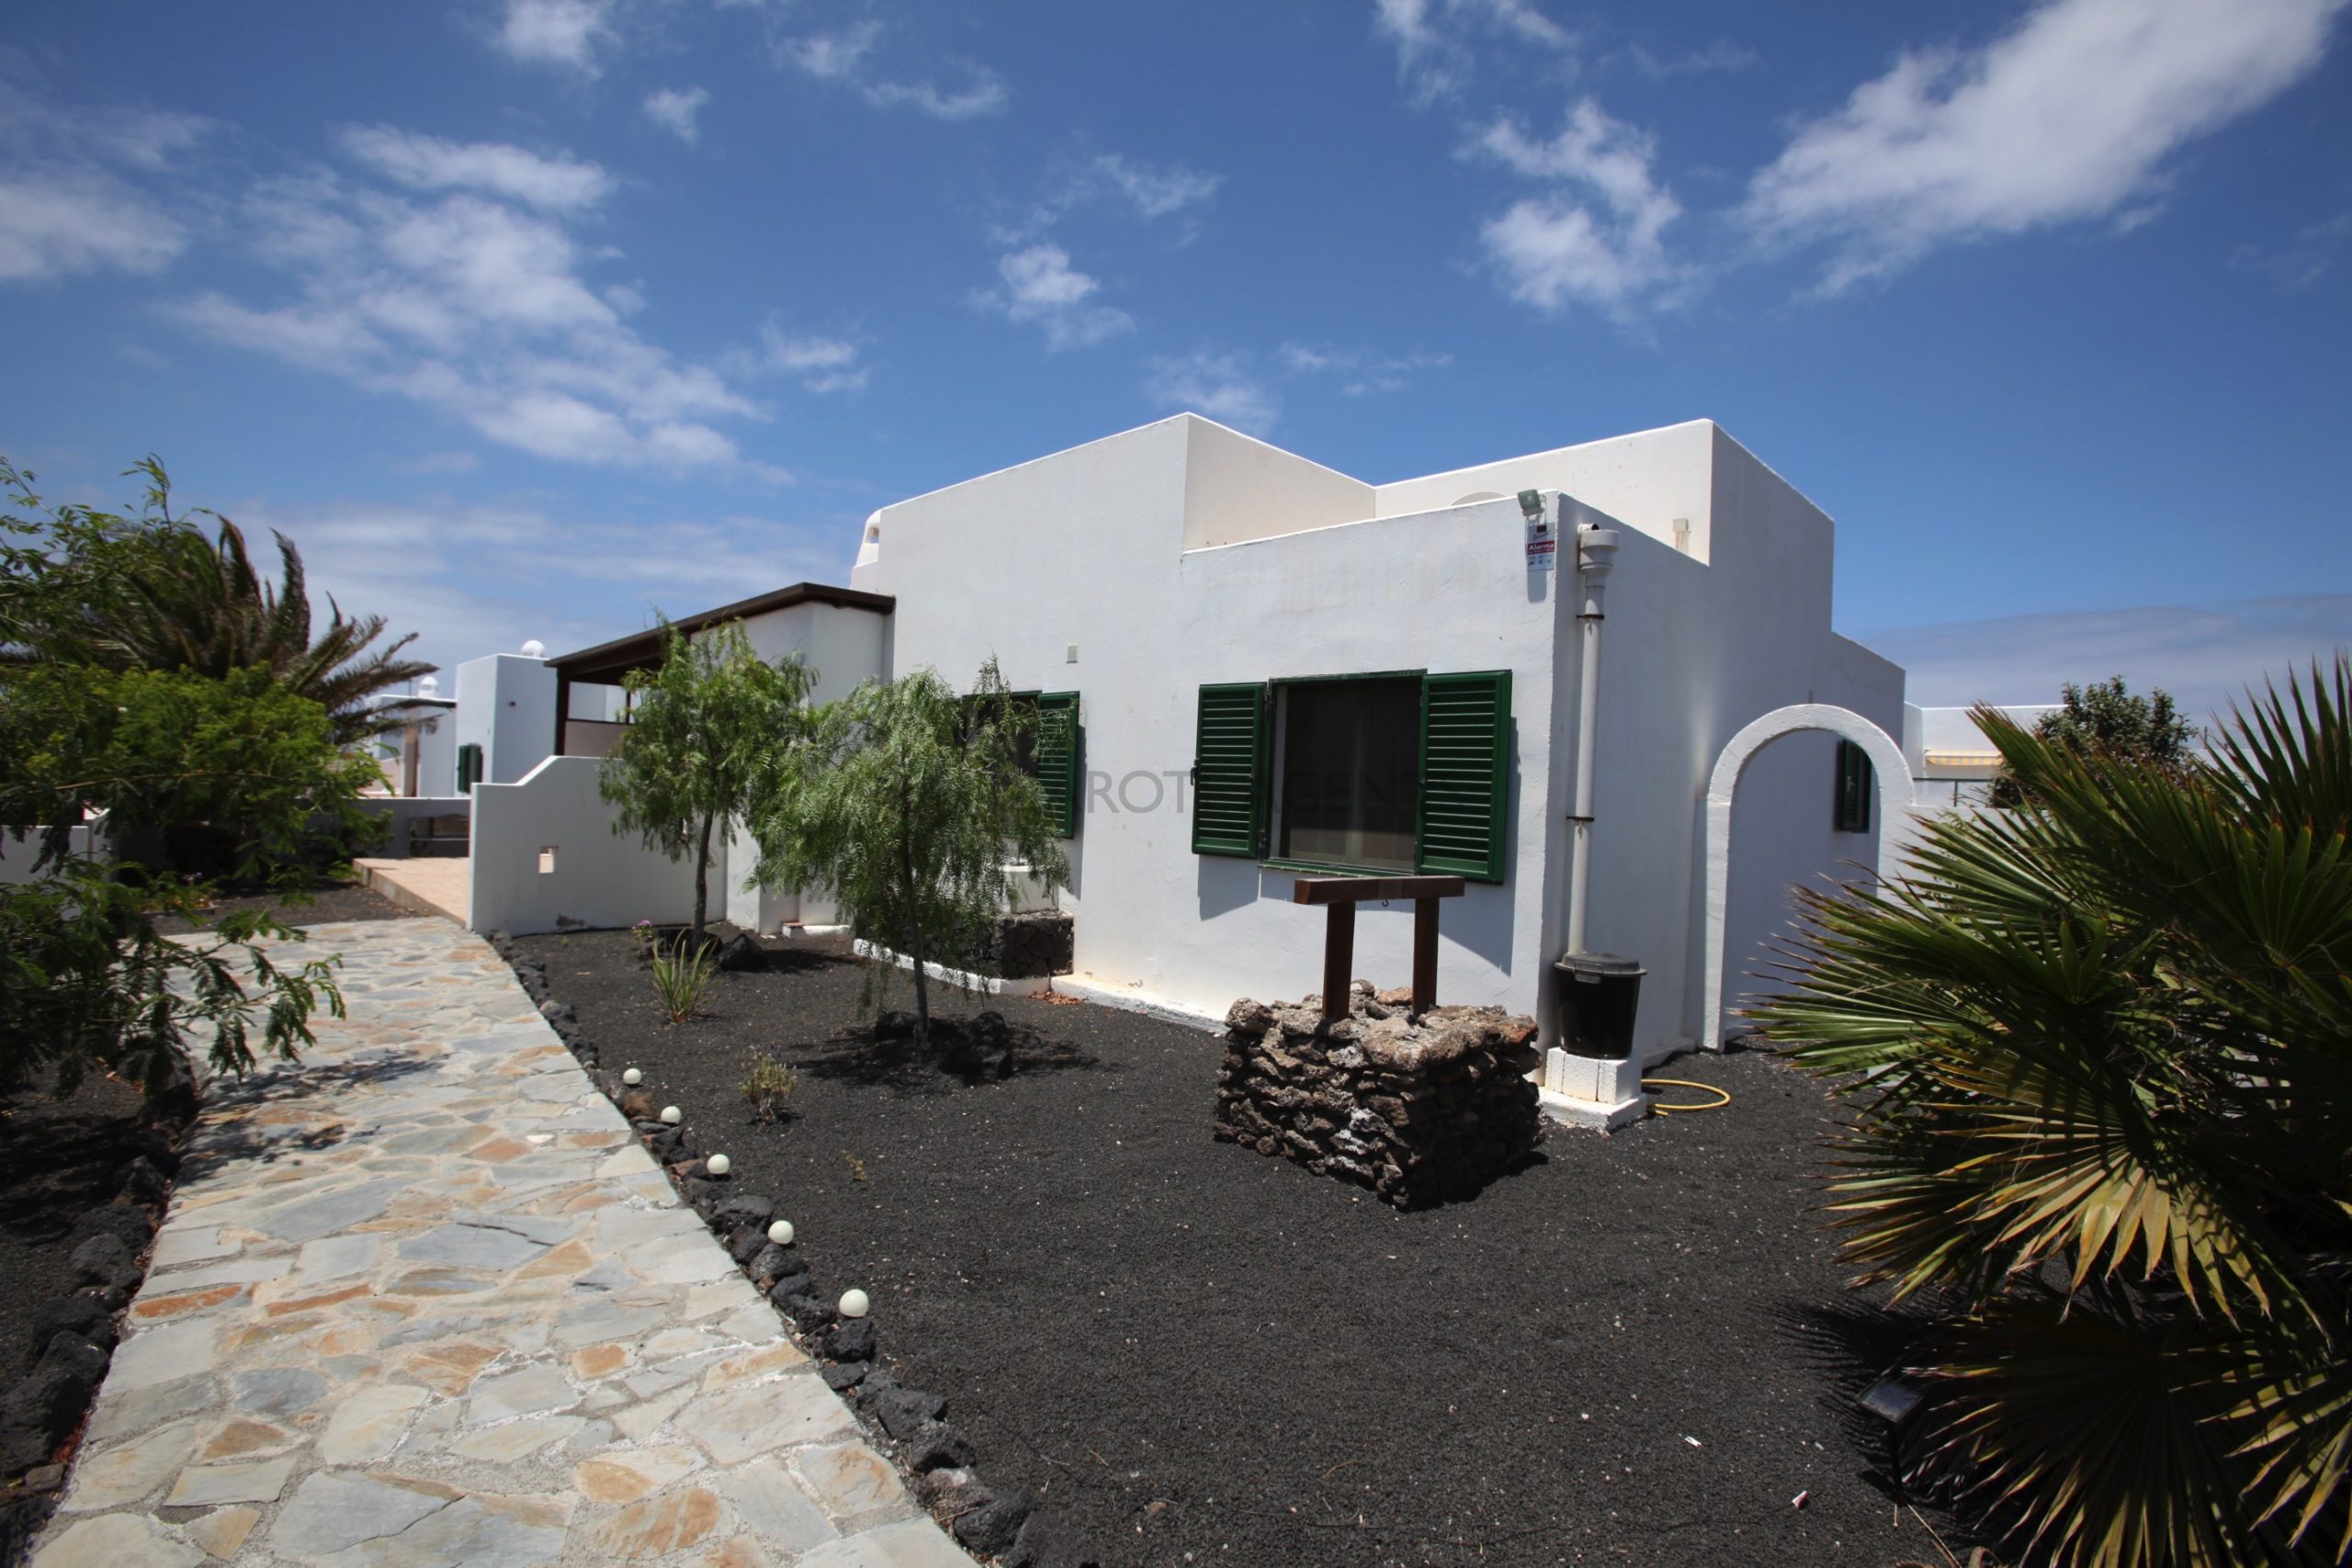 Detached 3 Bedroom Bungalow for sale in Lanzarote in Complex with Communal Pool in Playa Blanca